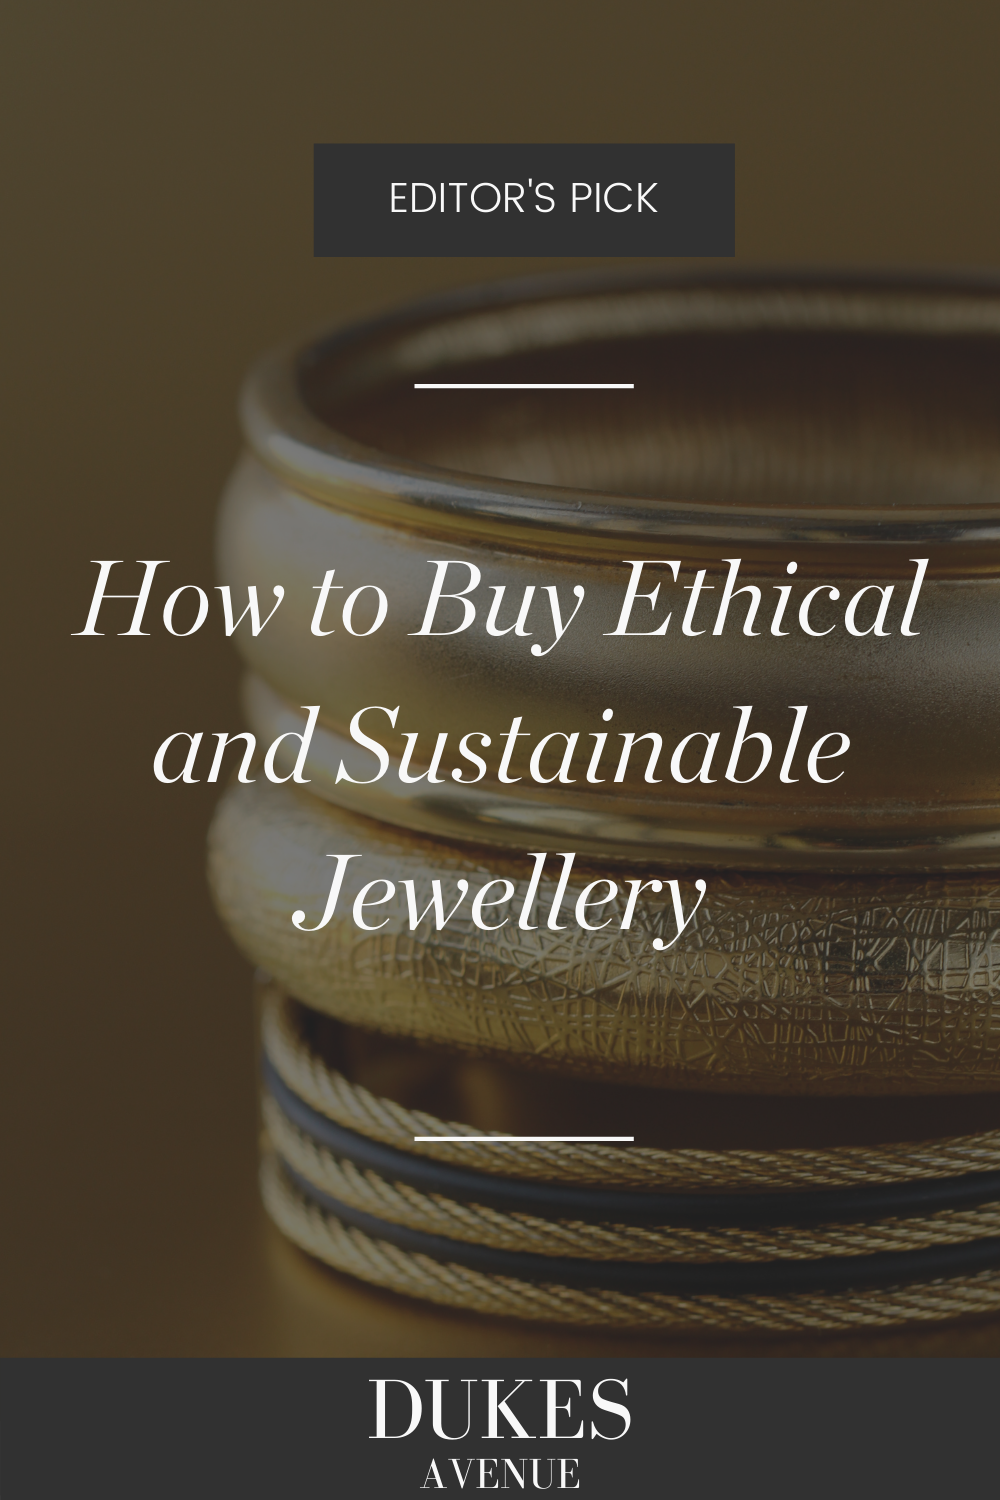 Sustainable Jewellery Brands Pin